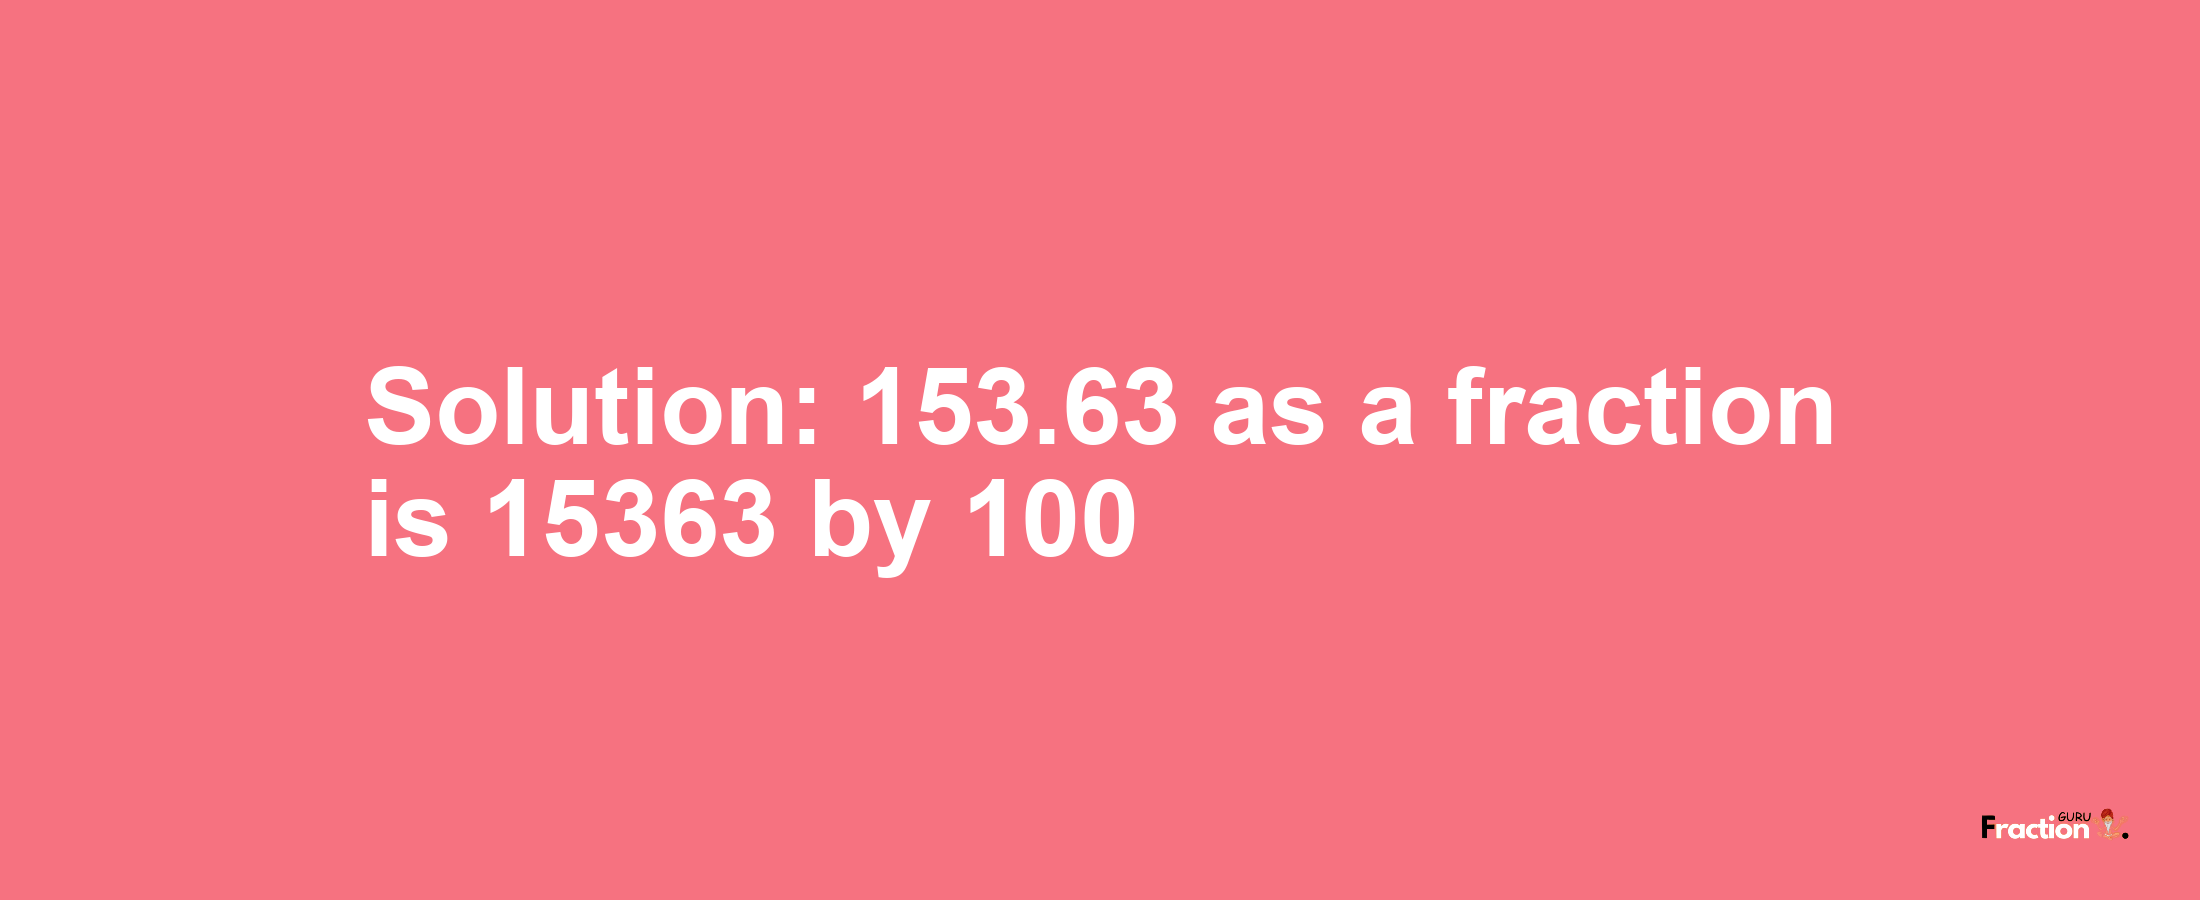 Solution:153.63 as a fraction is 15363/100